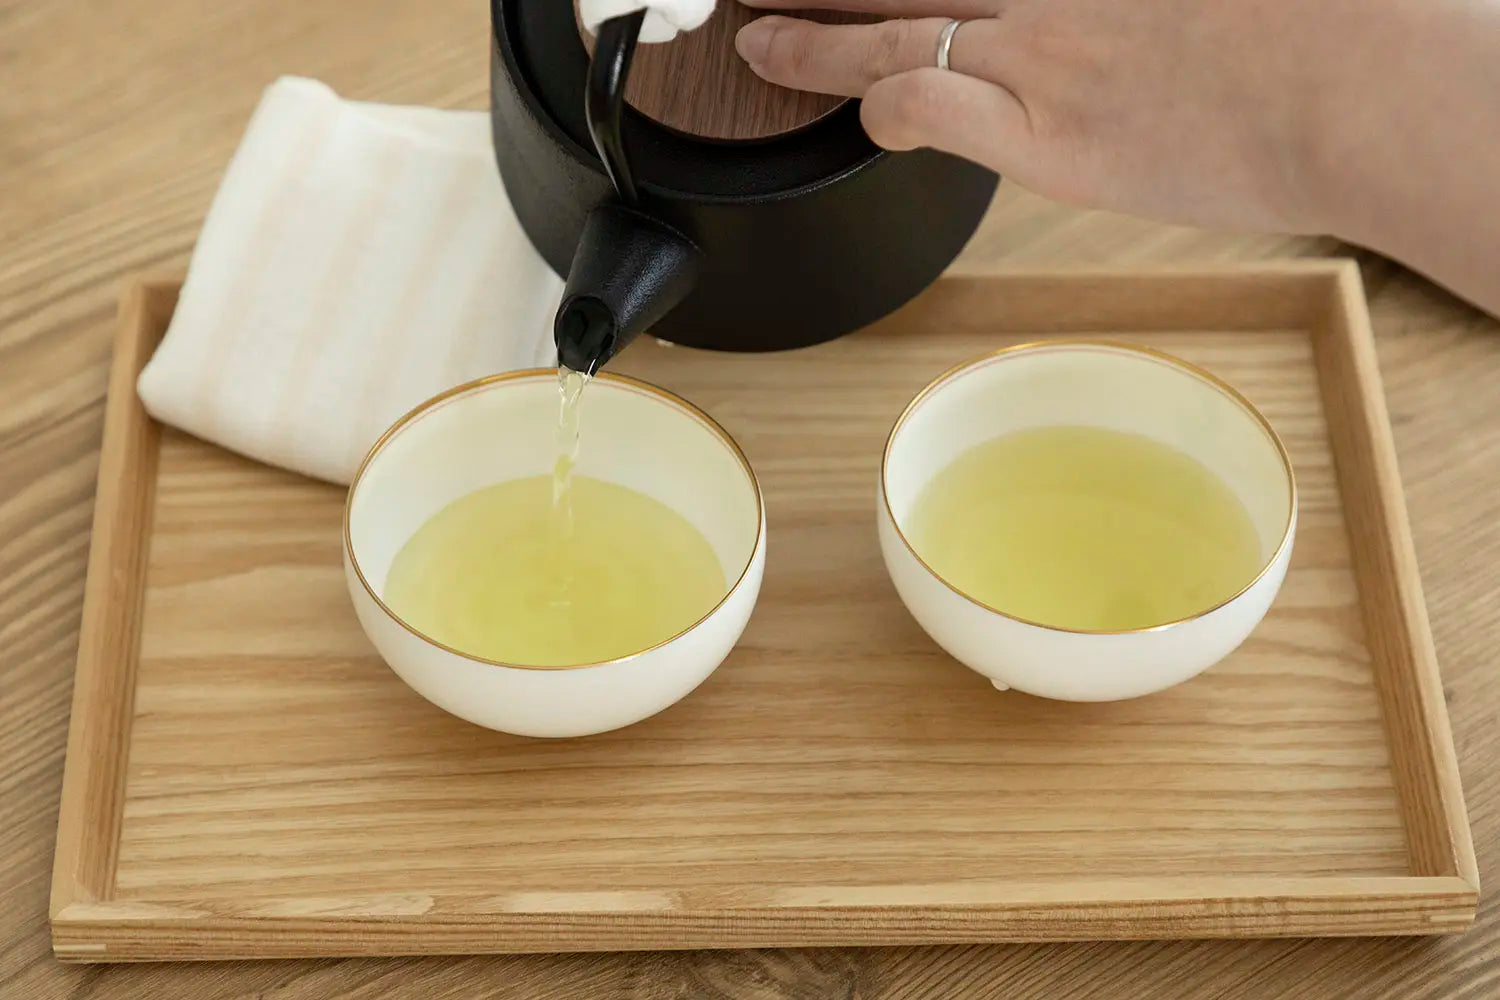 Pouring hot tea into teacup to serve